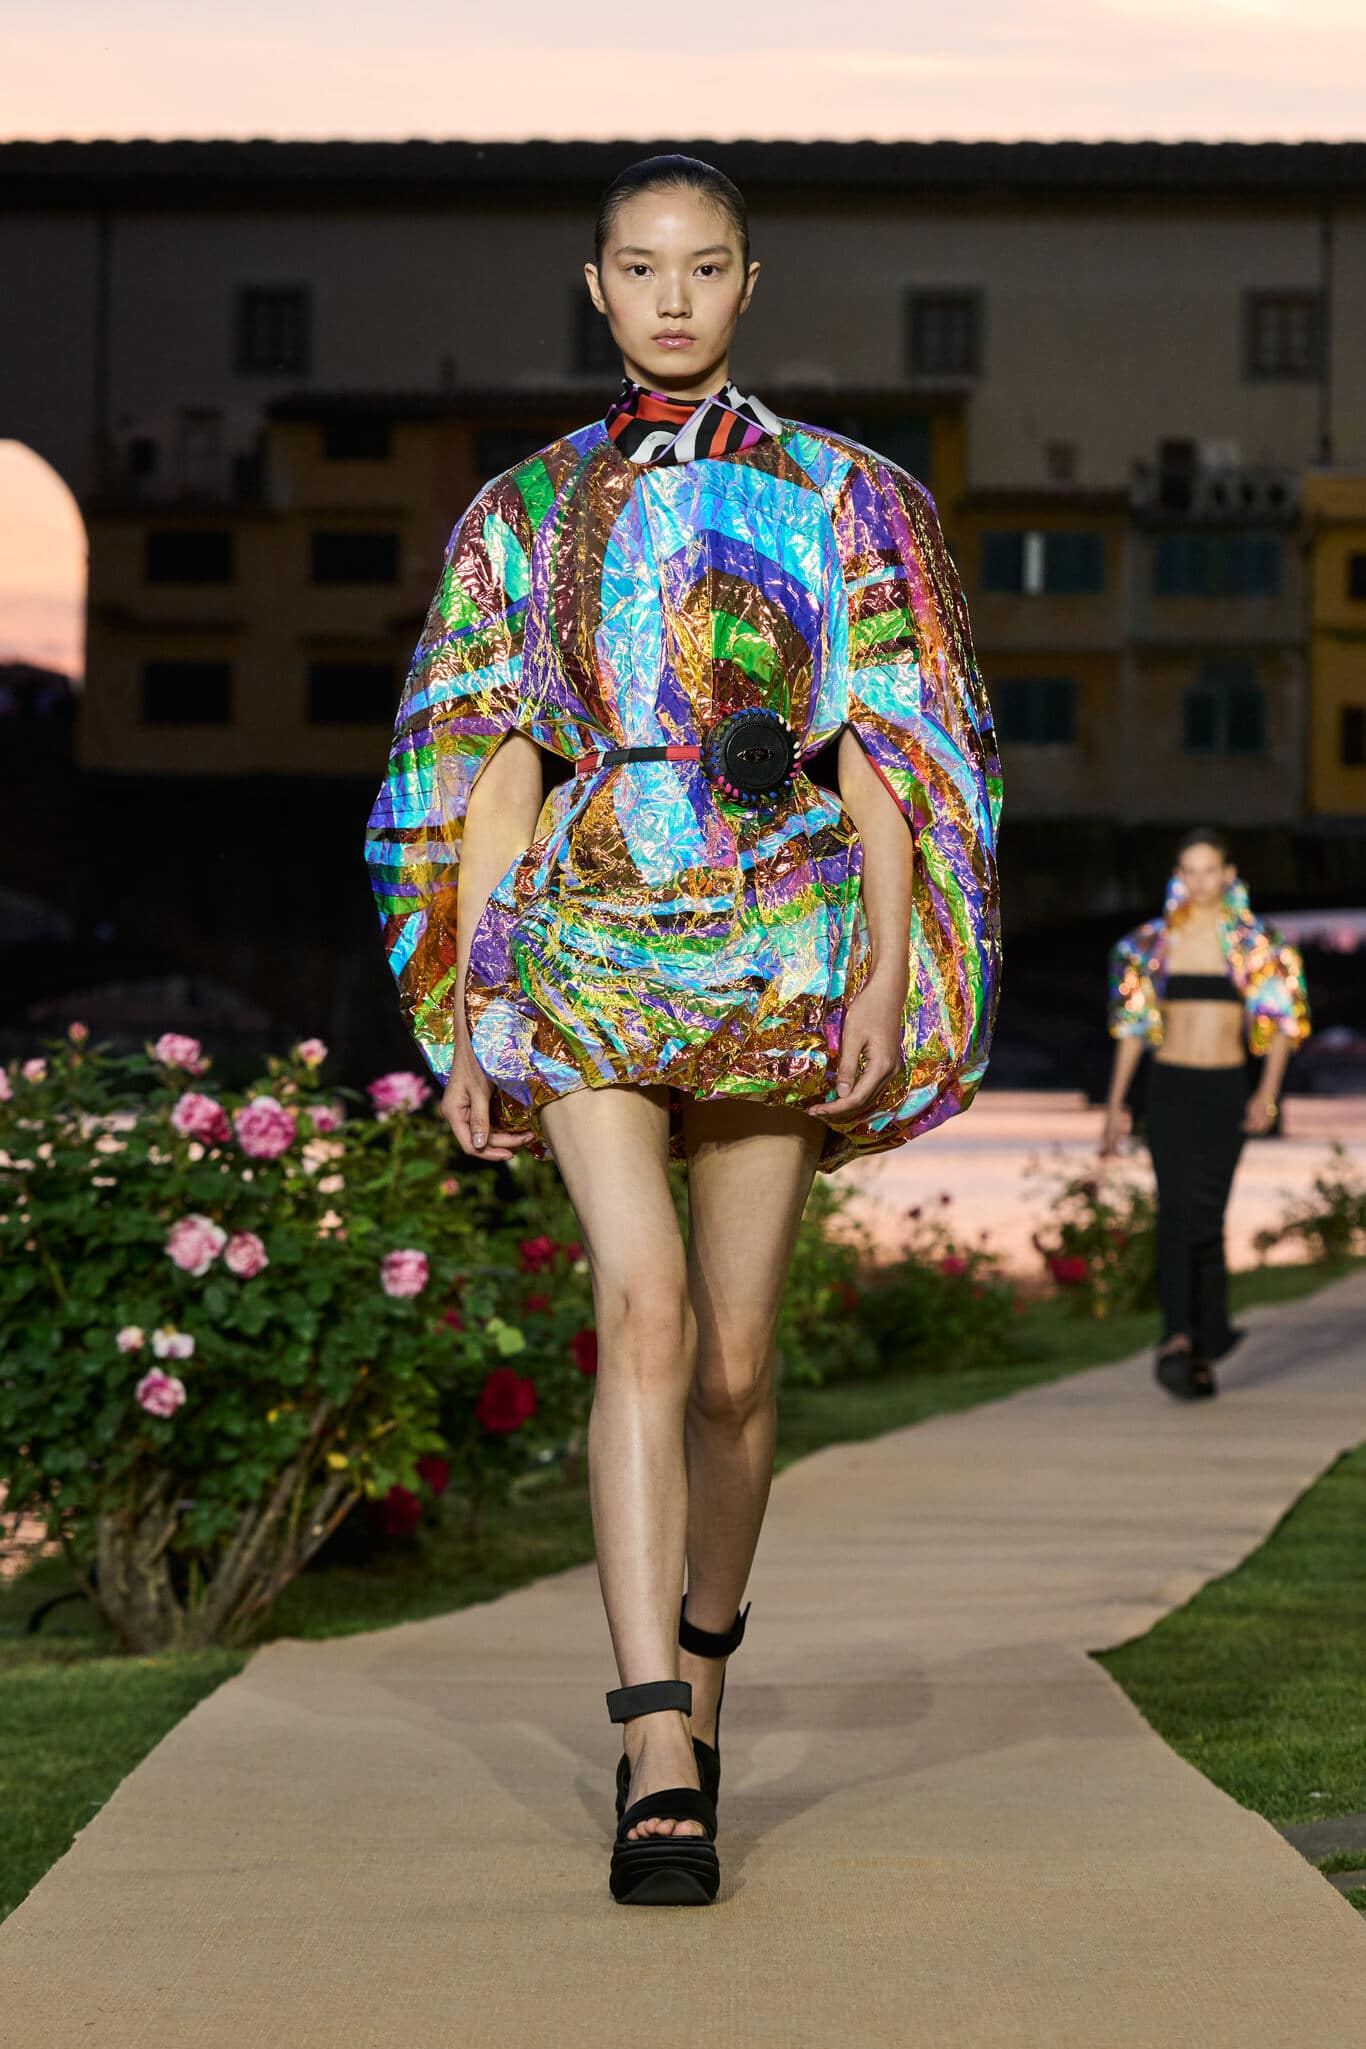 Camille Miceli presents her first fashion show for Emilio Pucci - HIGHXTAR.